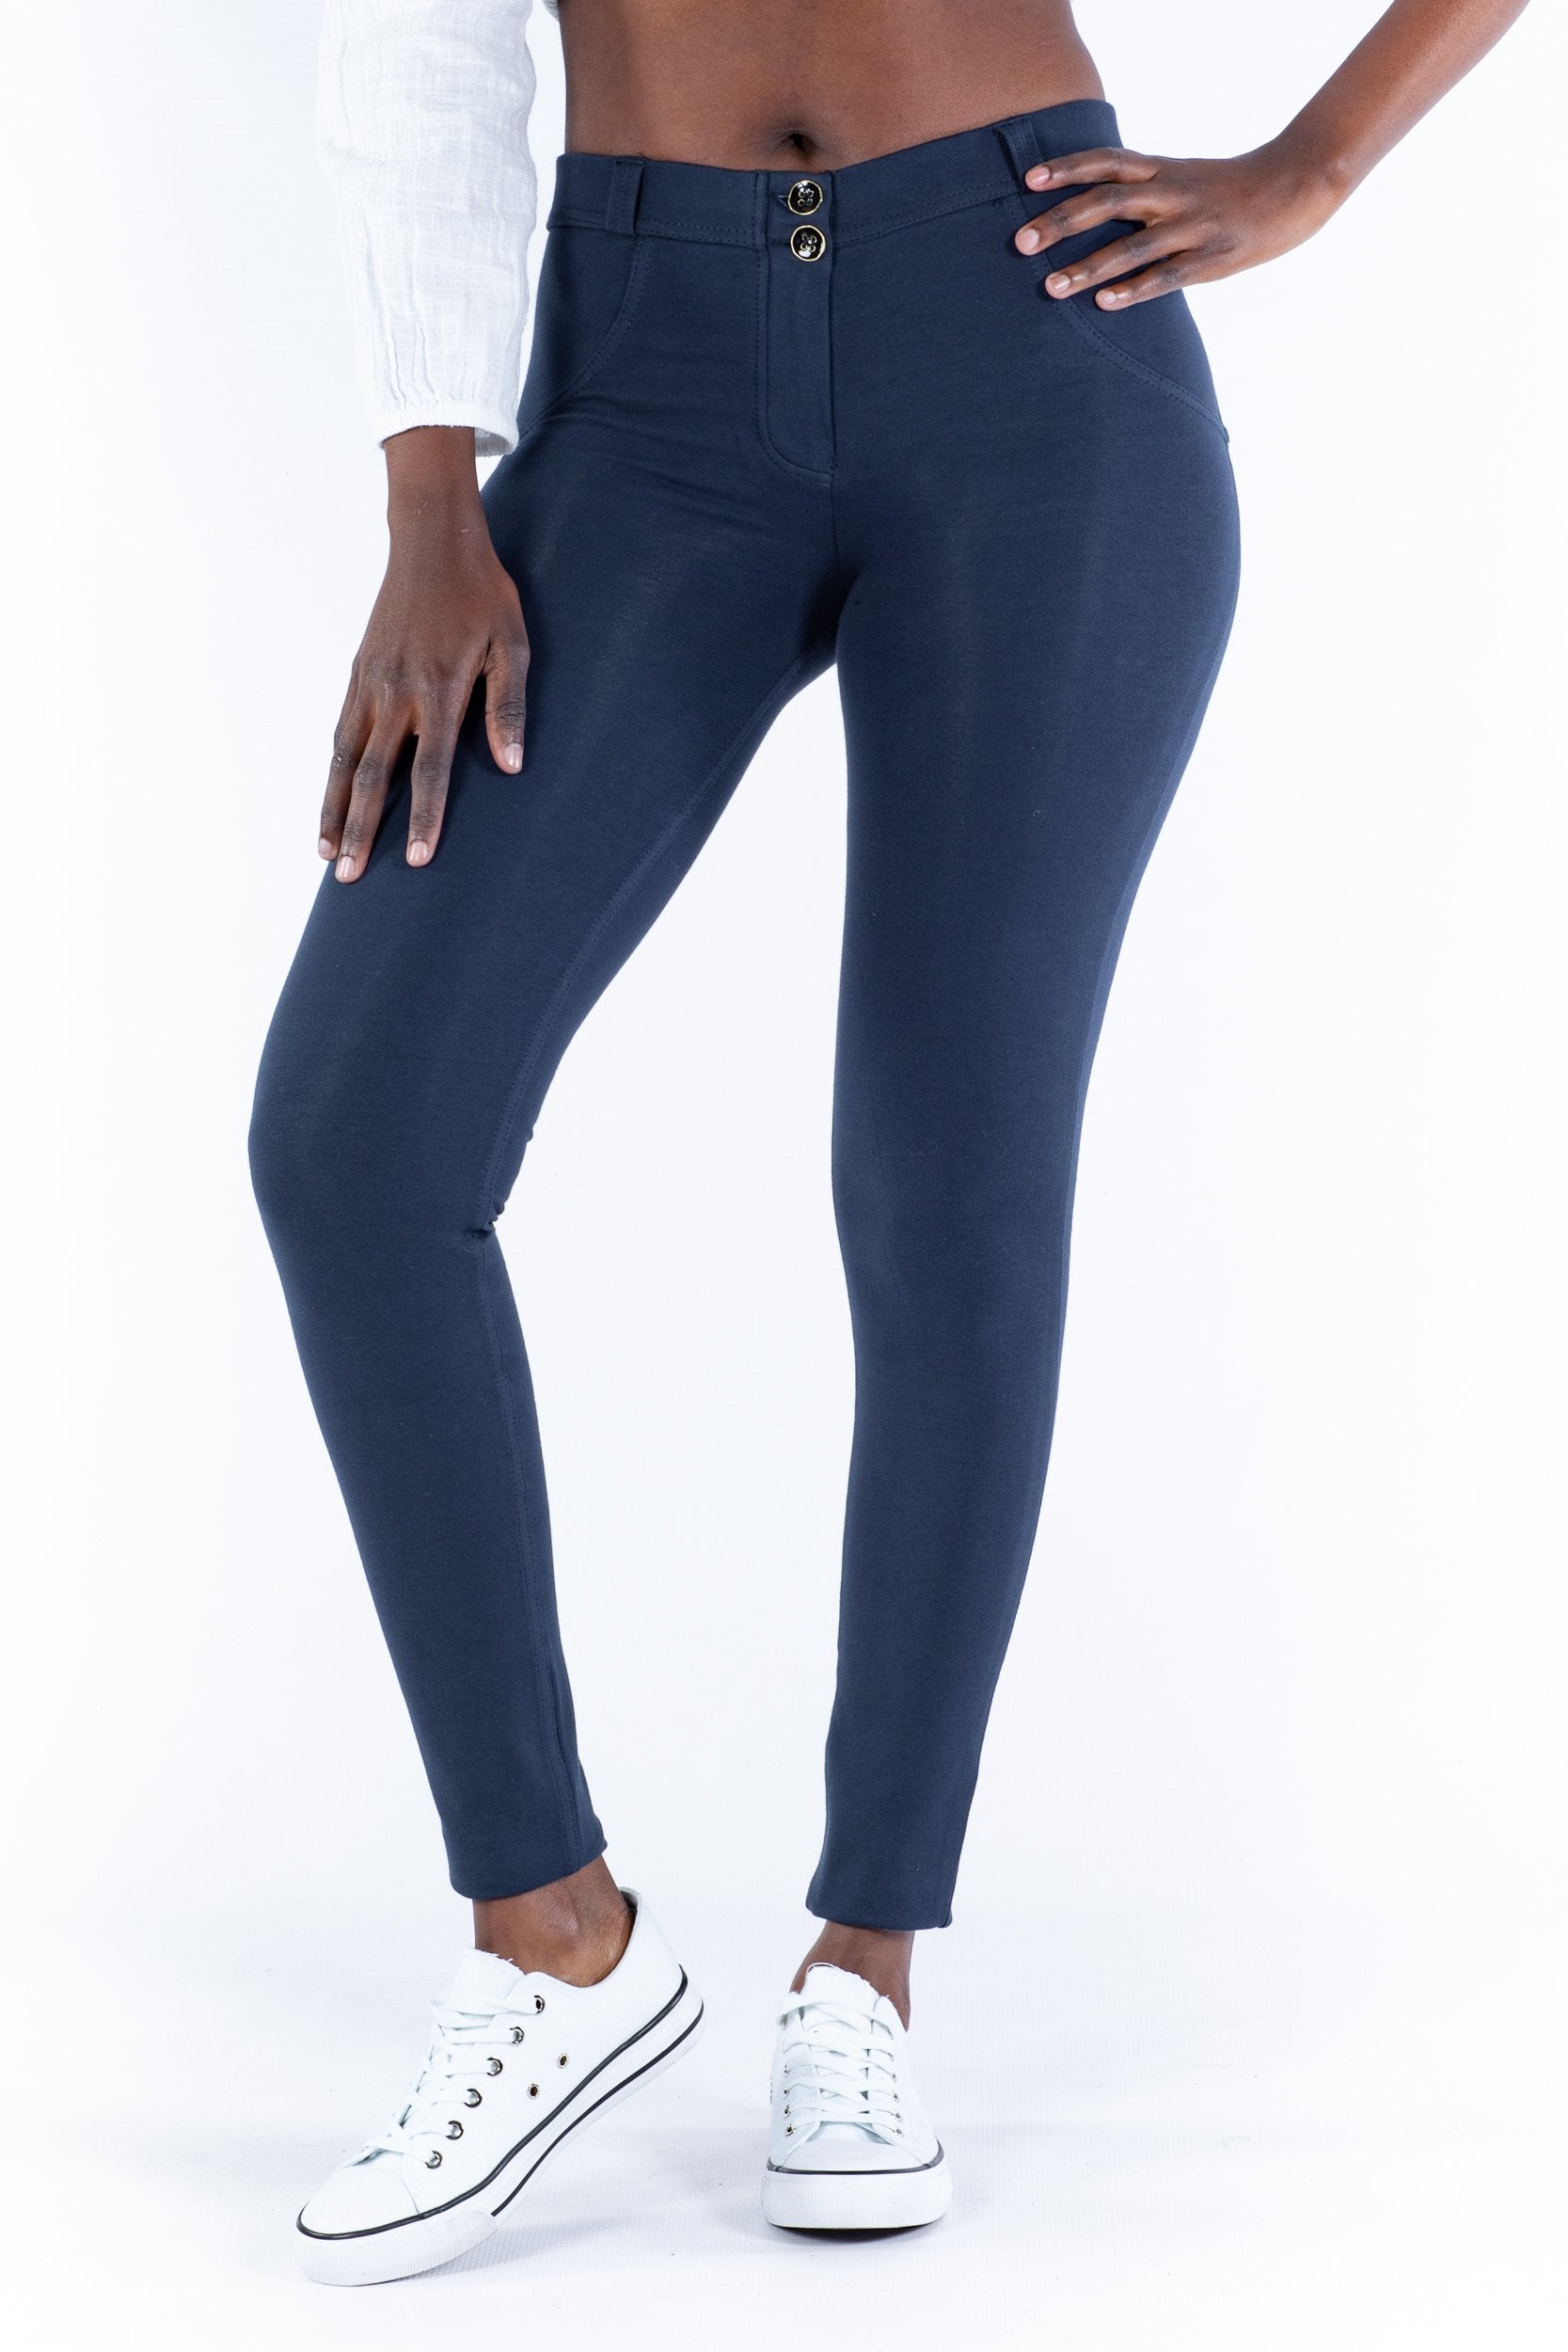 Image of Mid waist Butt lifting Shaping pants - Navy Blue